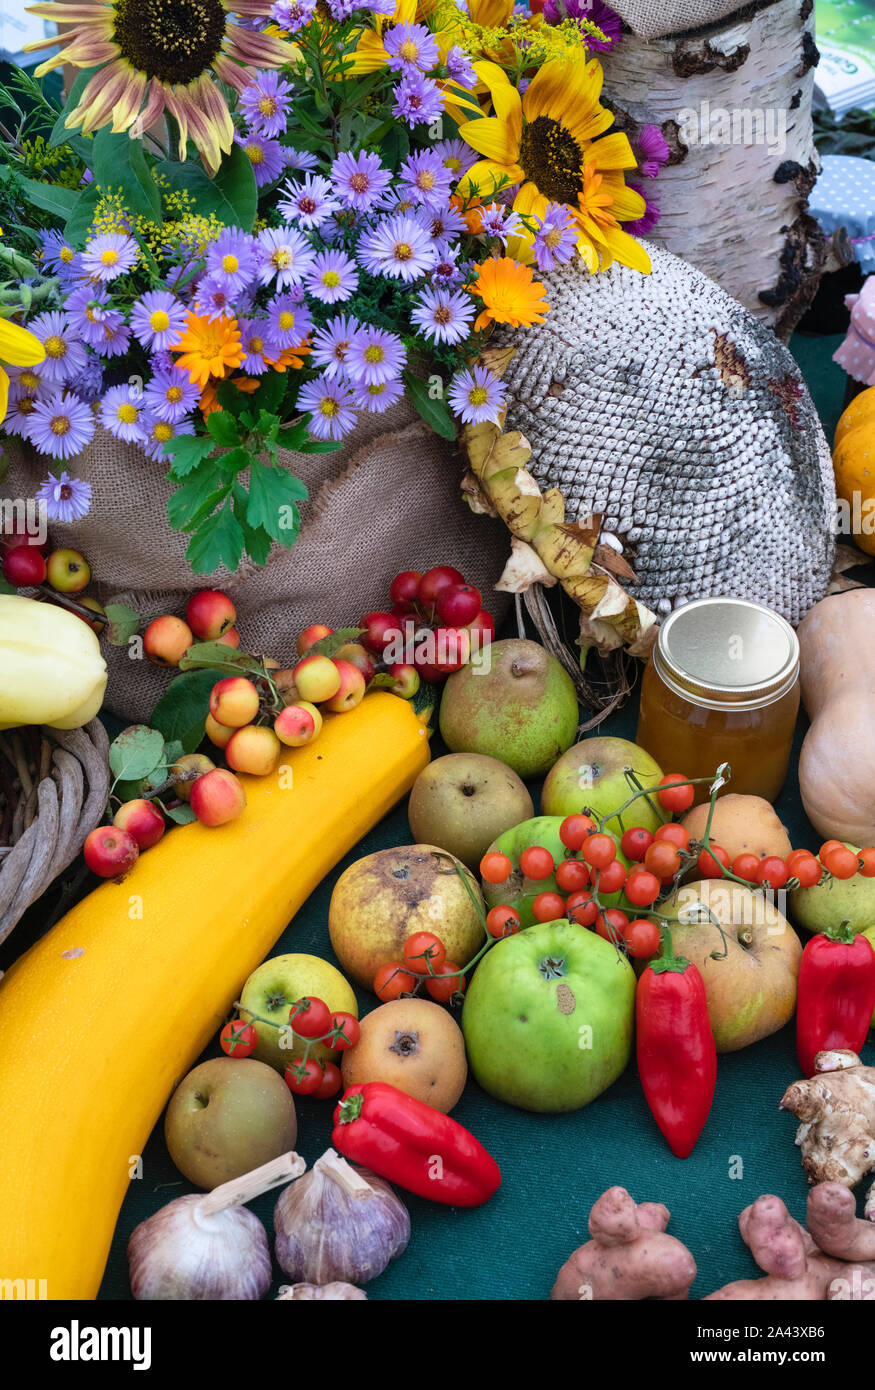 Vegetable, fruit and flower display. UK Stock Photo